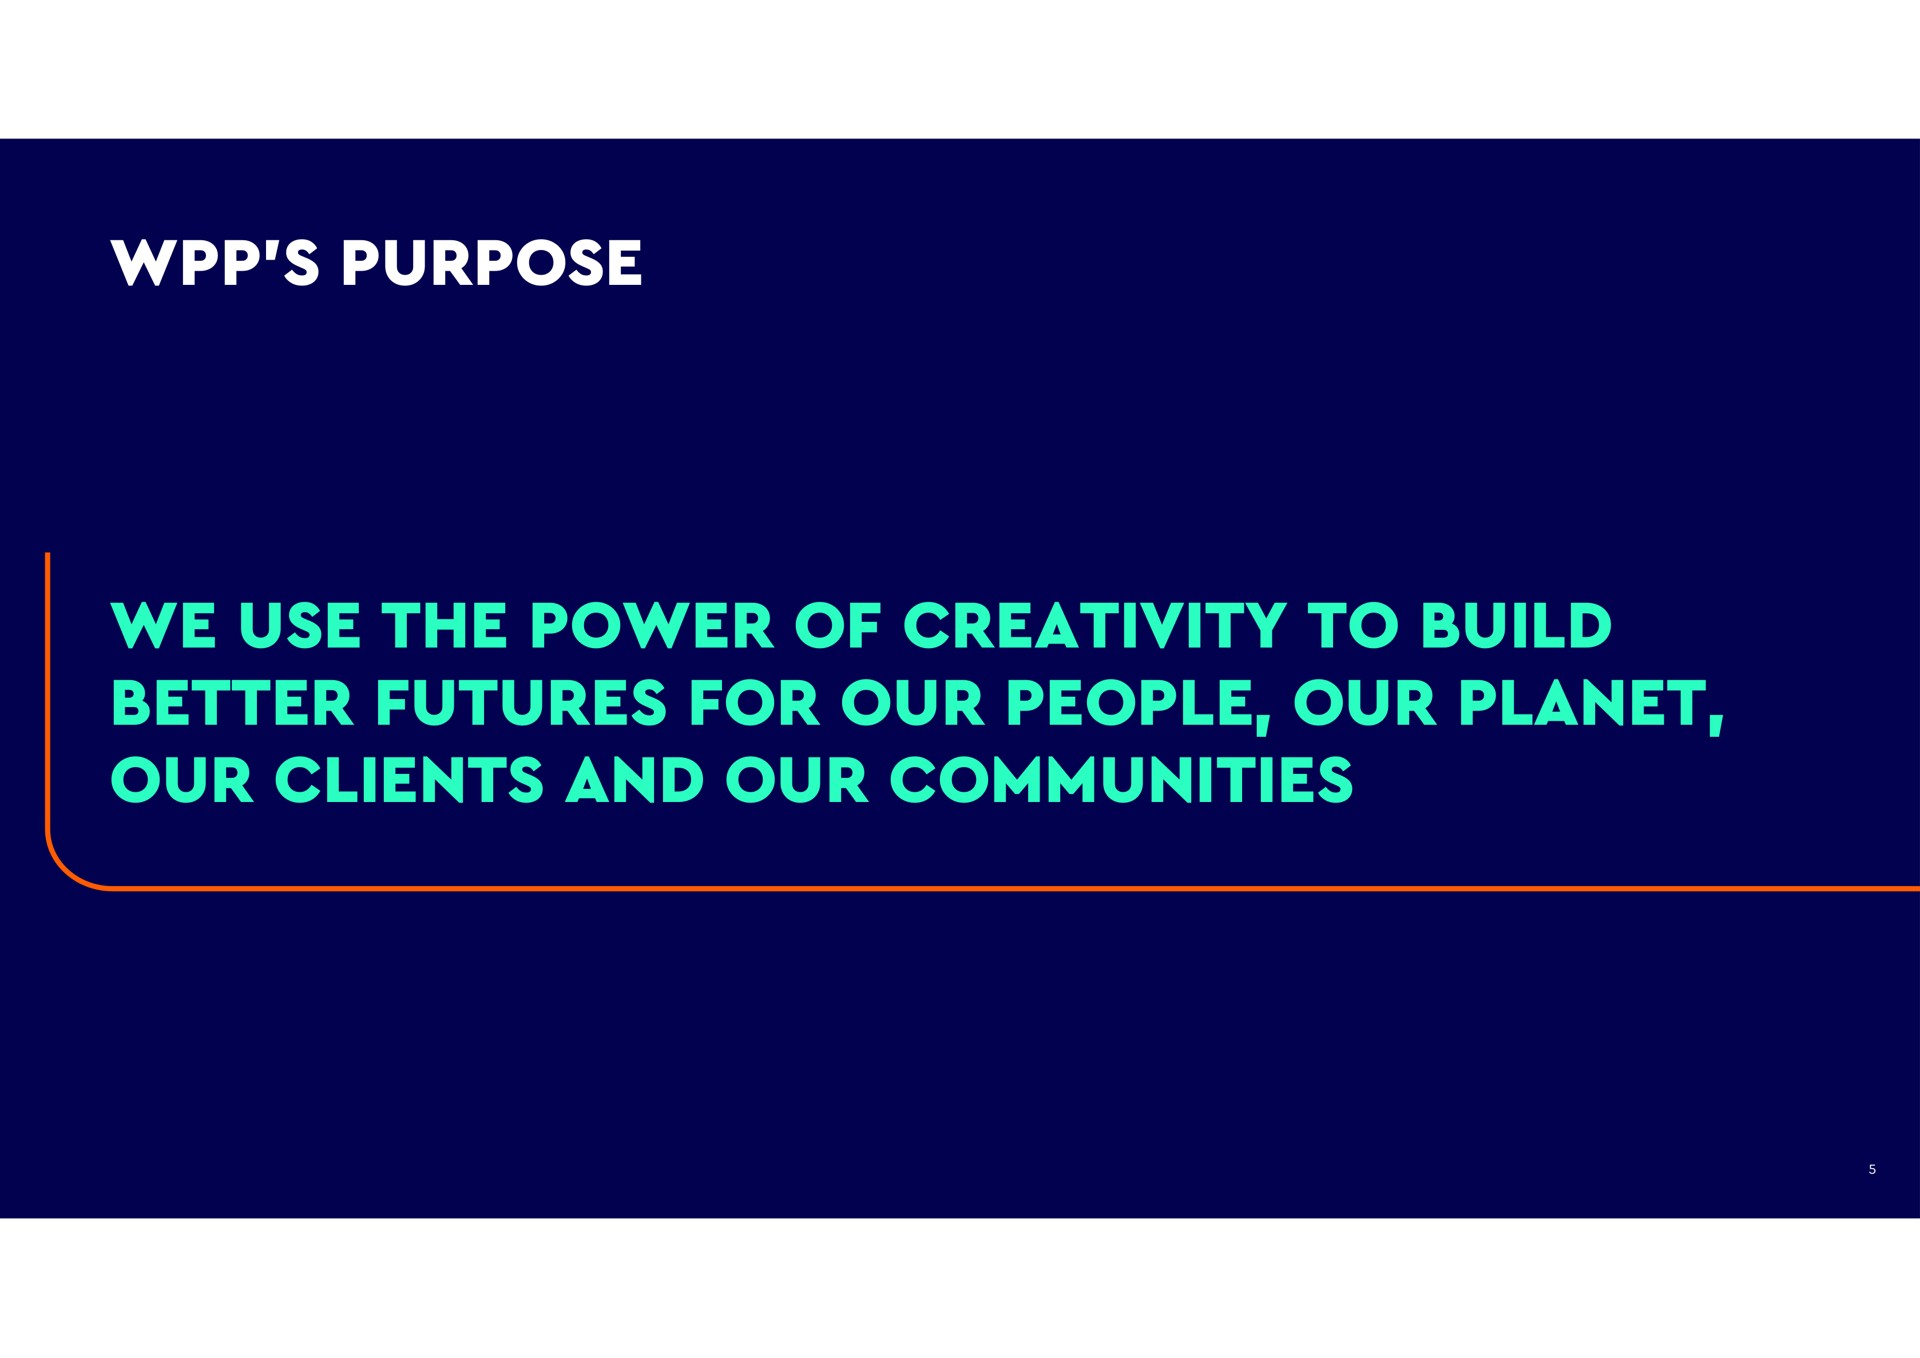 purpose we use the power of creativity to build better futures for our people our planet our clients and our communities | WPP